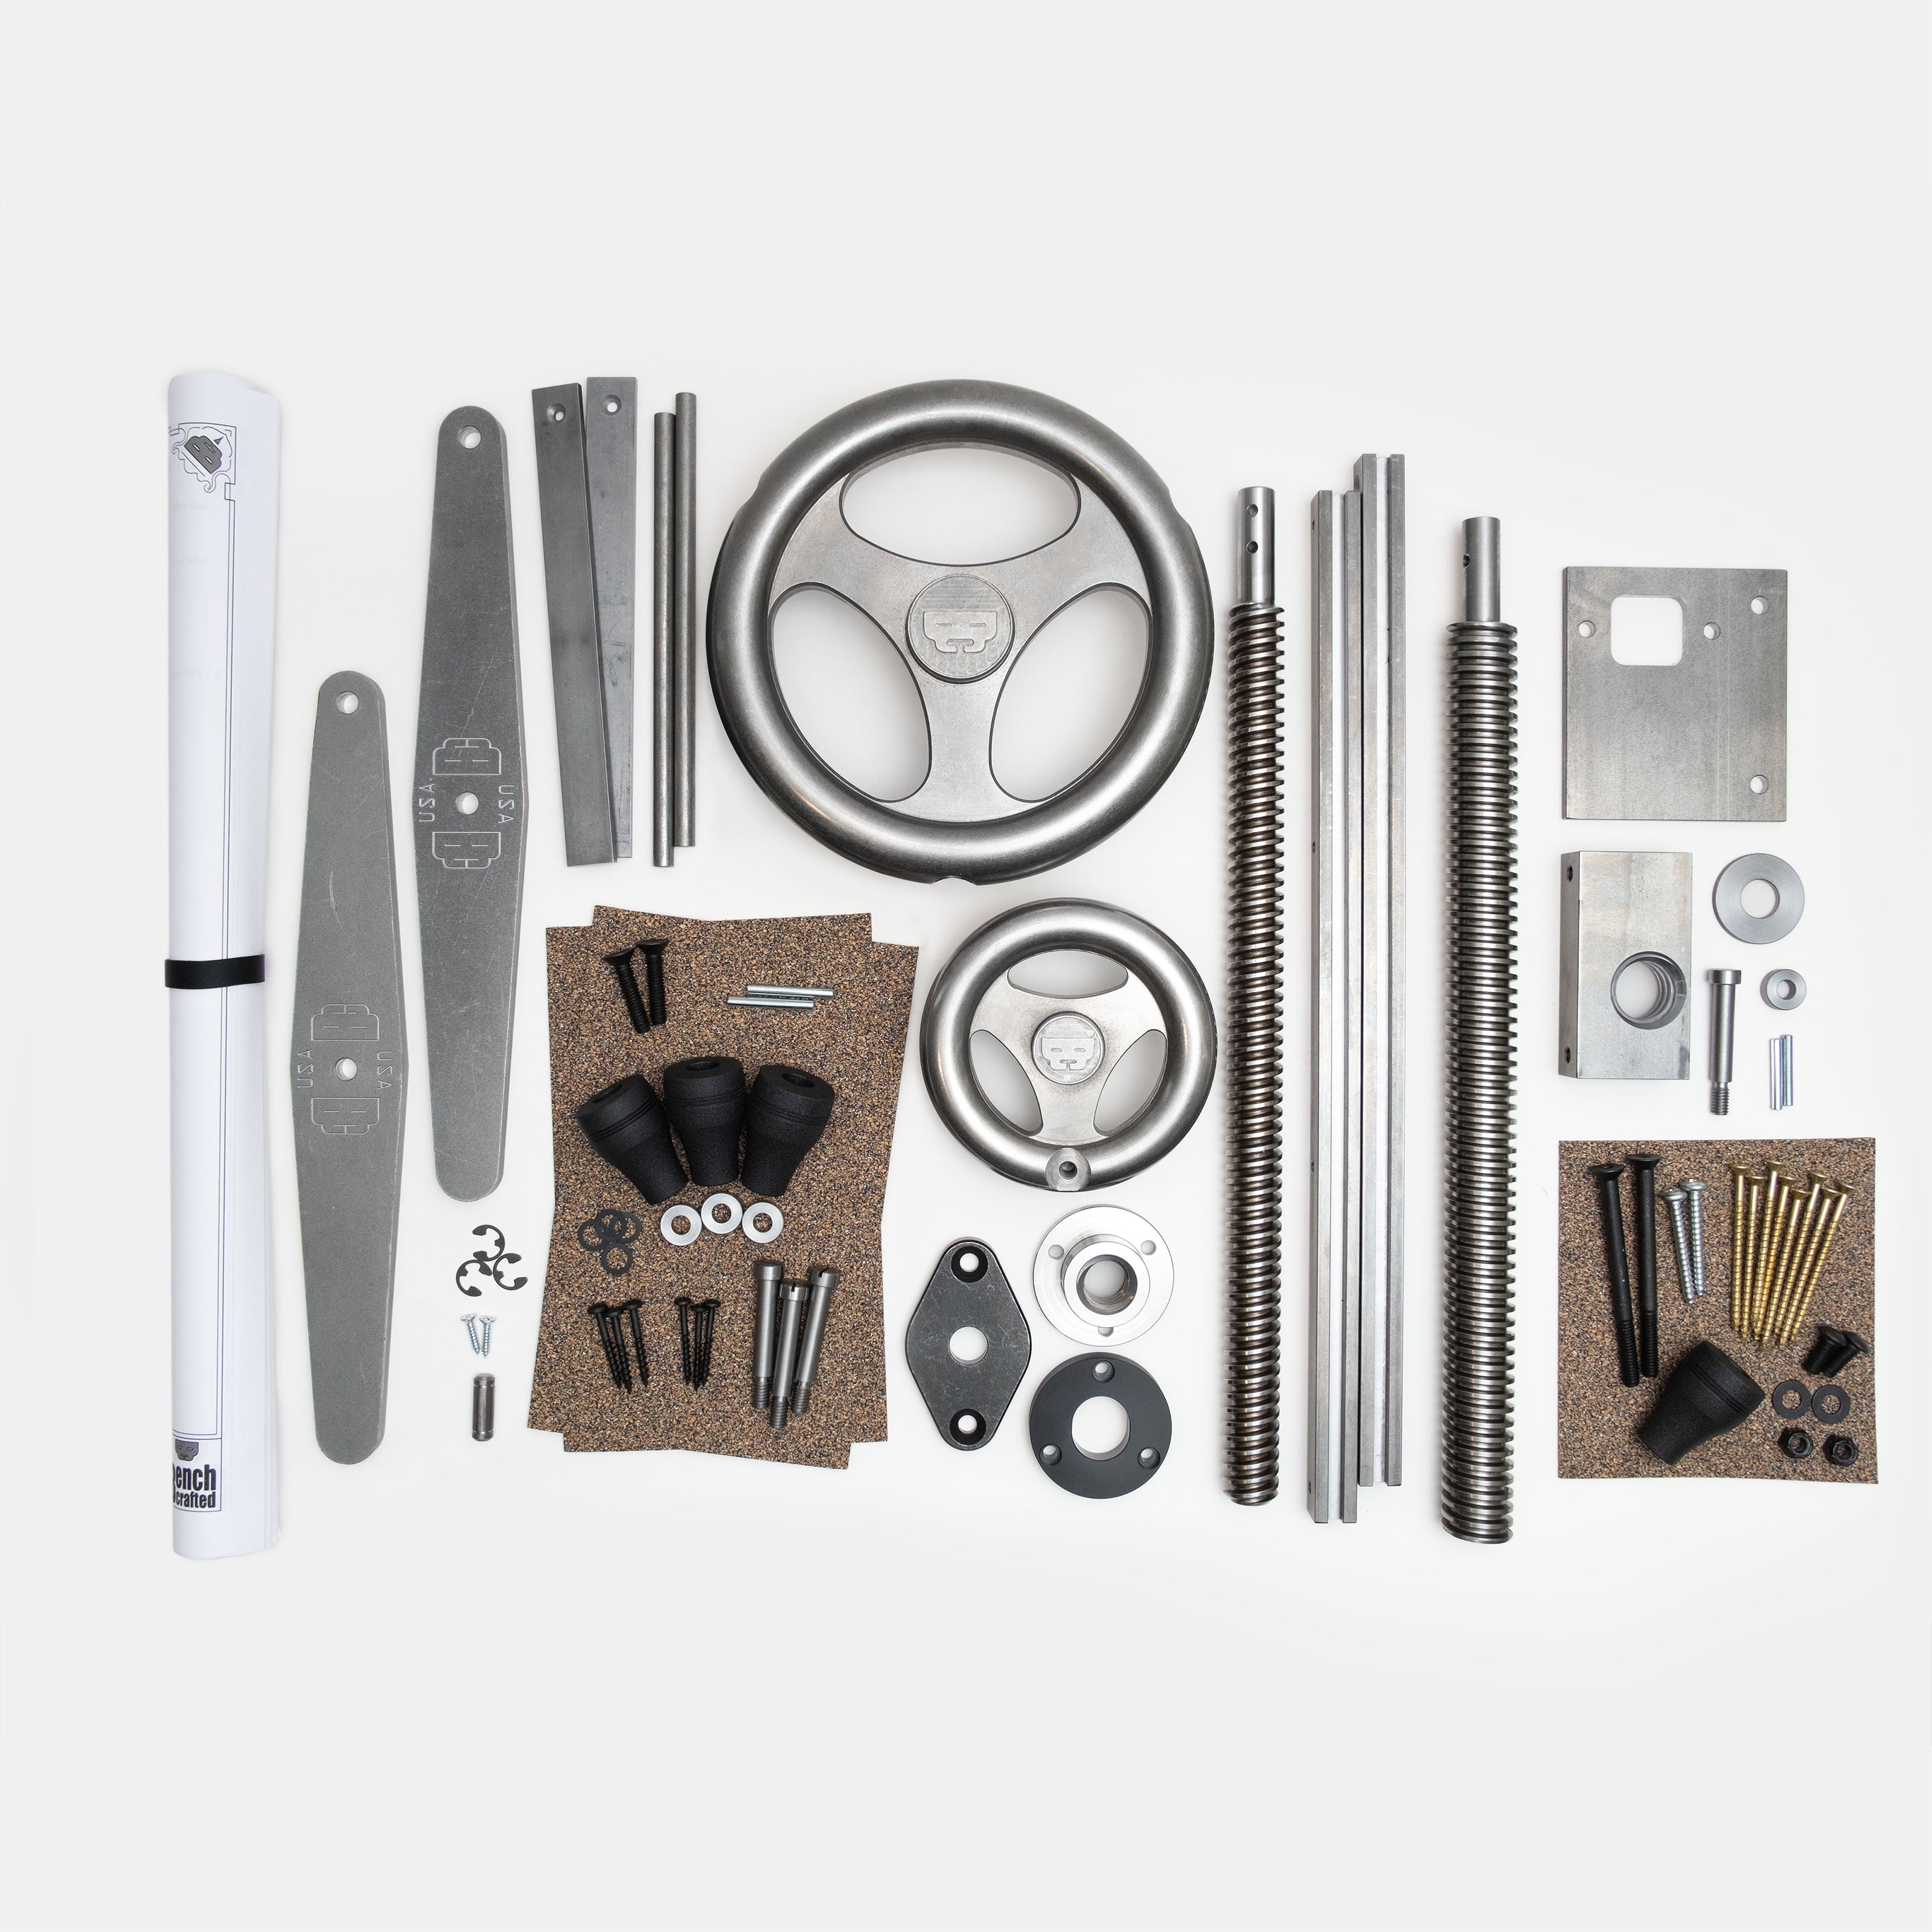 Benchmaker's Package